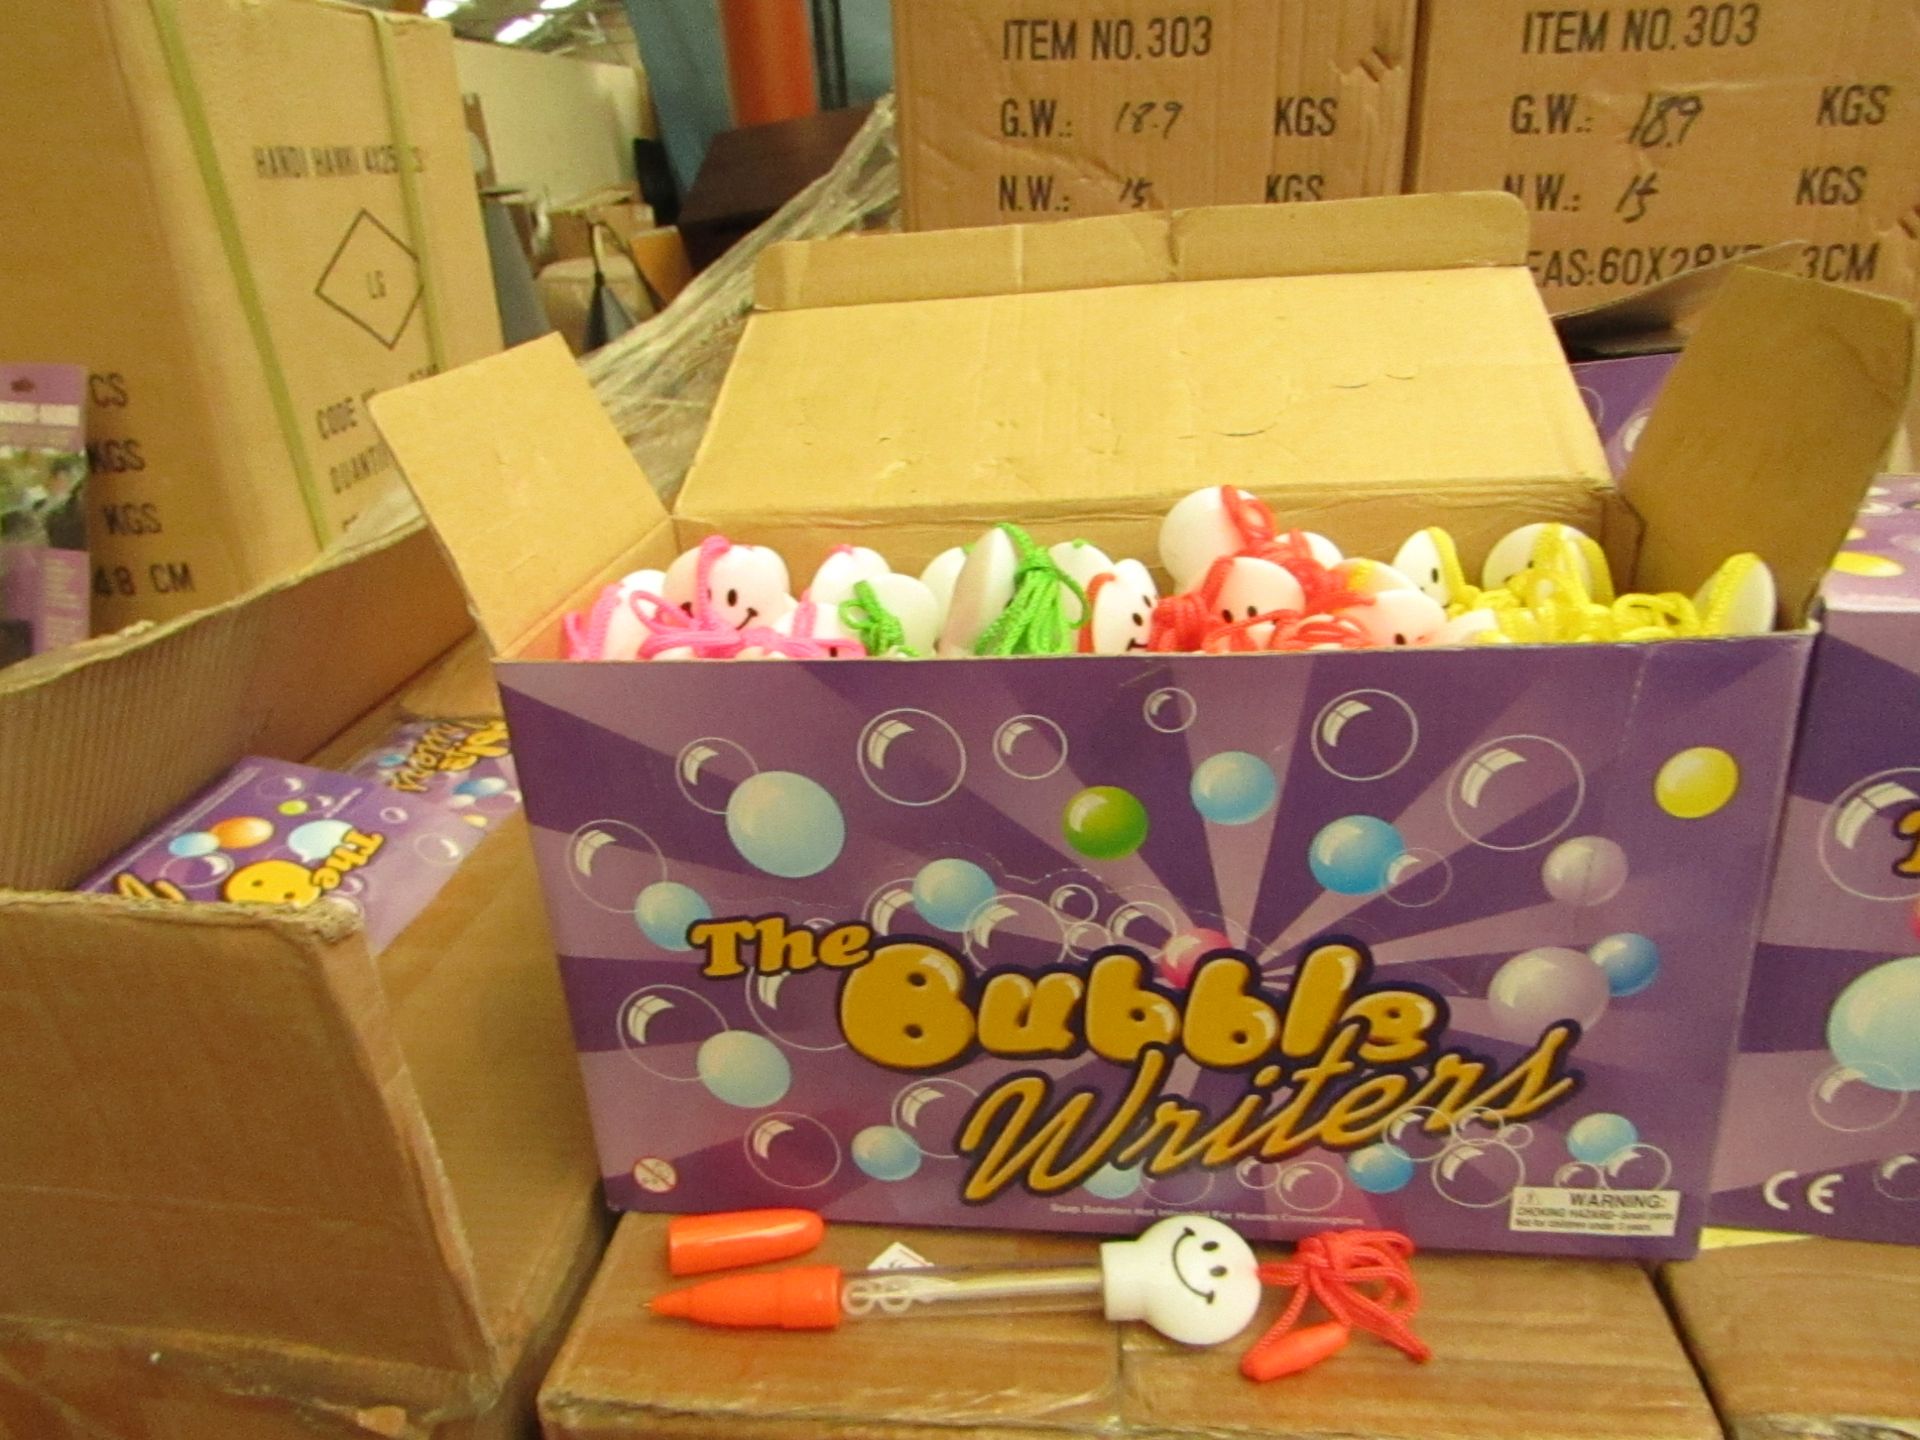 2 x Boxes of 48 per box The Bubble Writers Pens - Boxed.